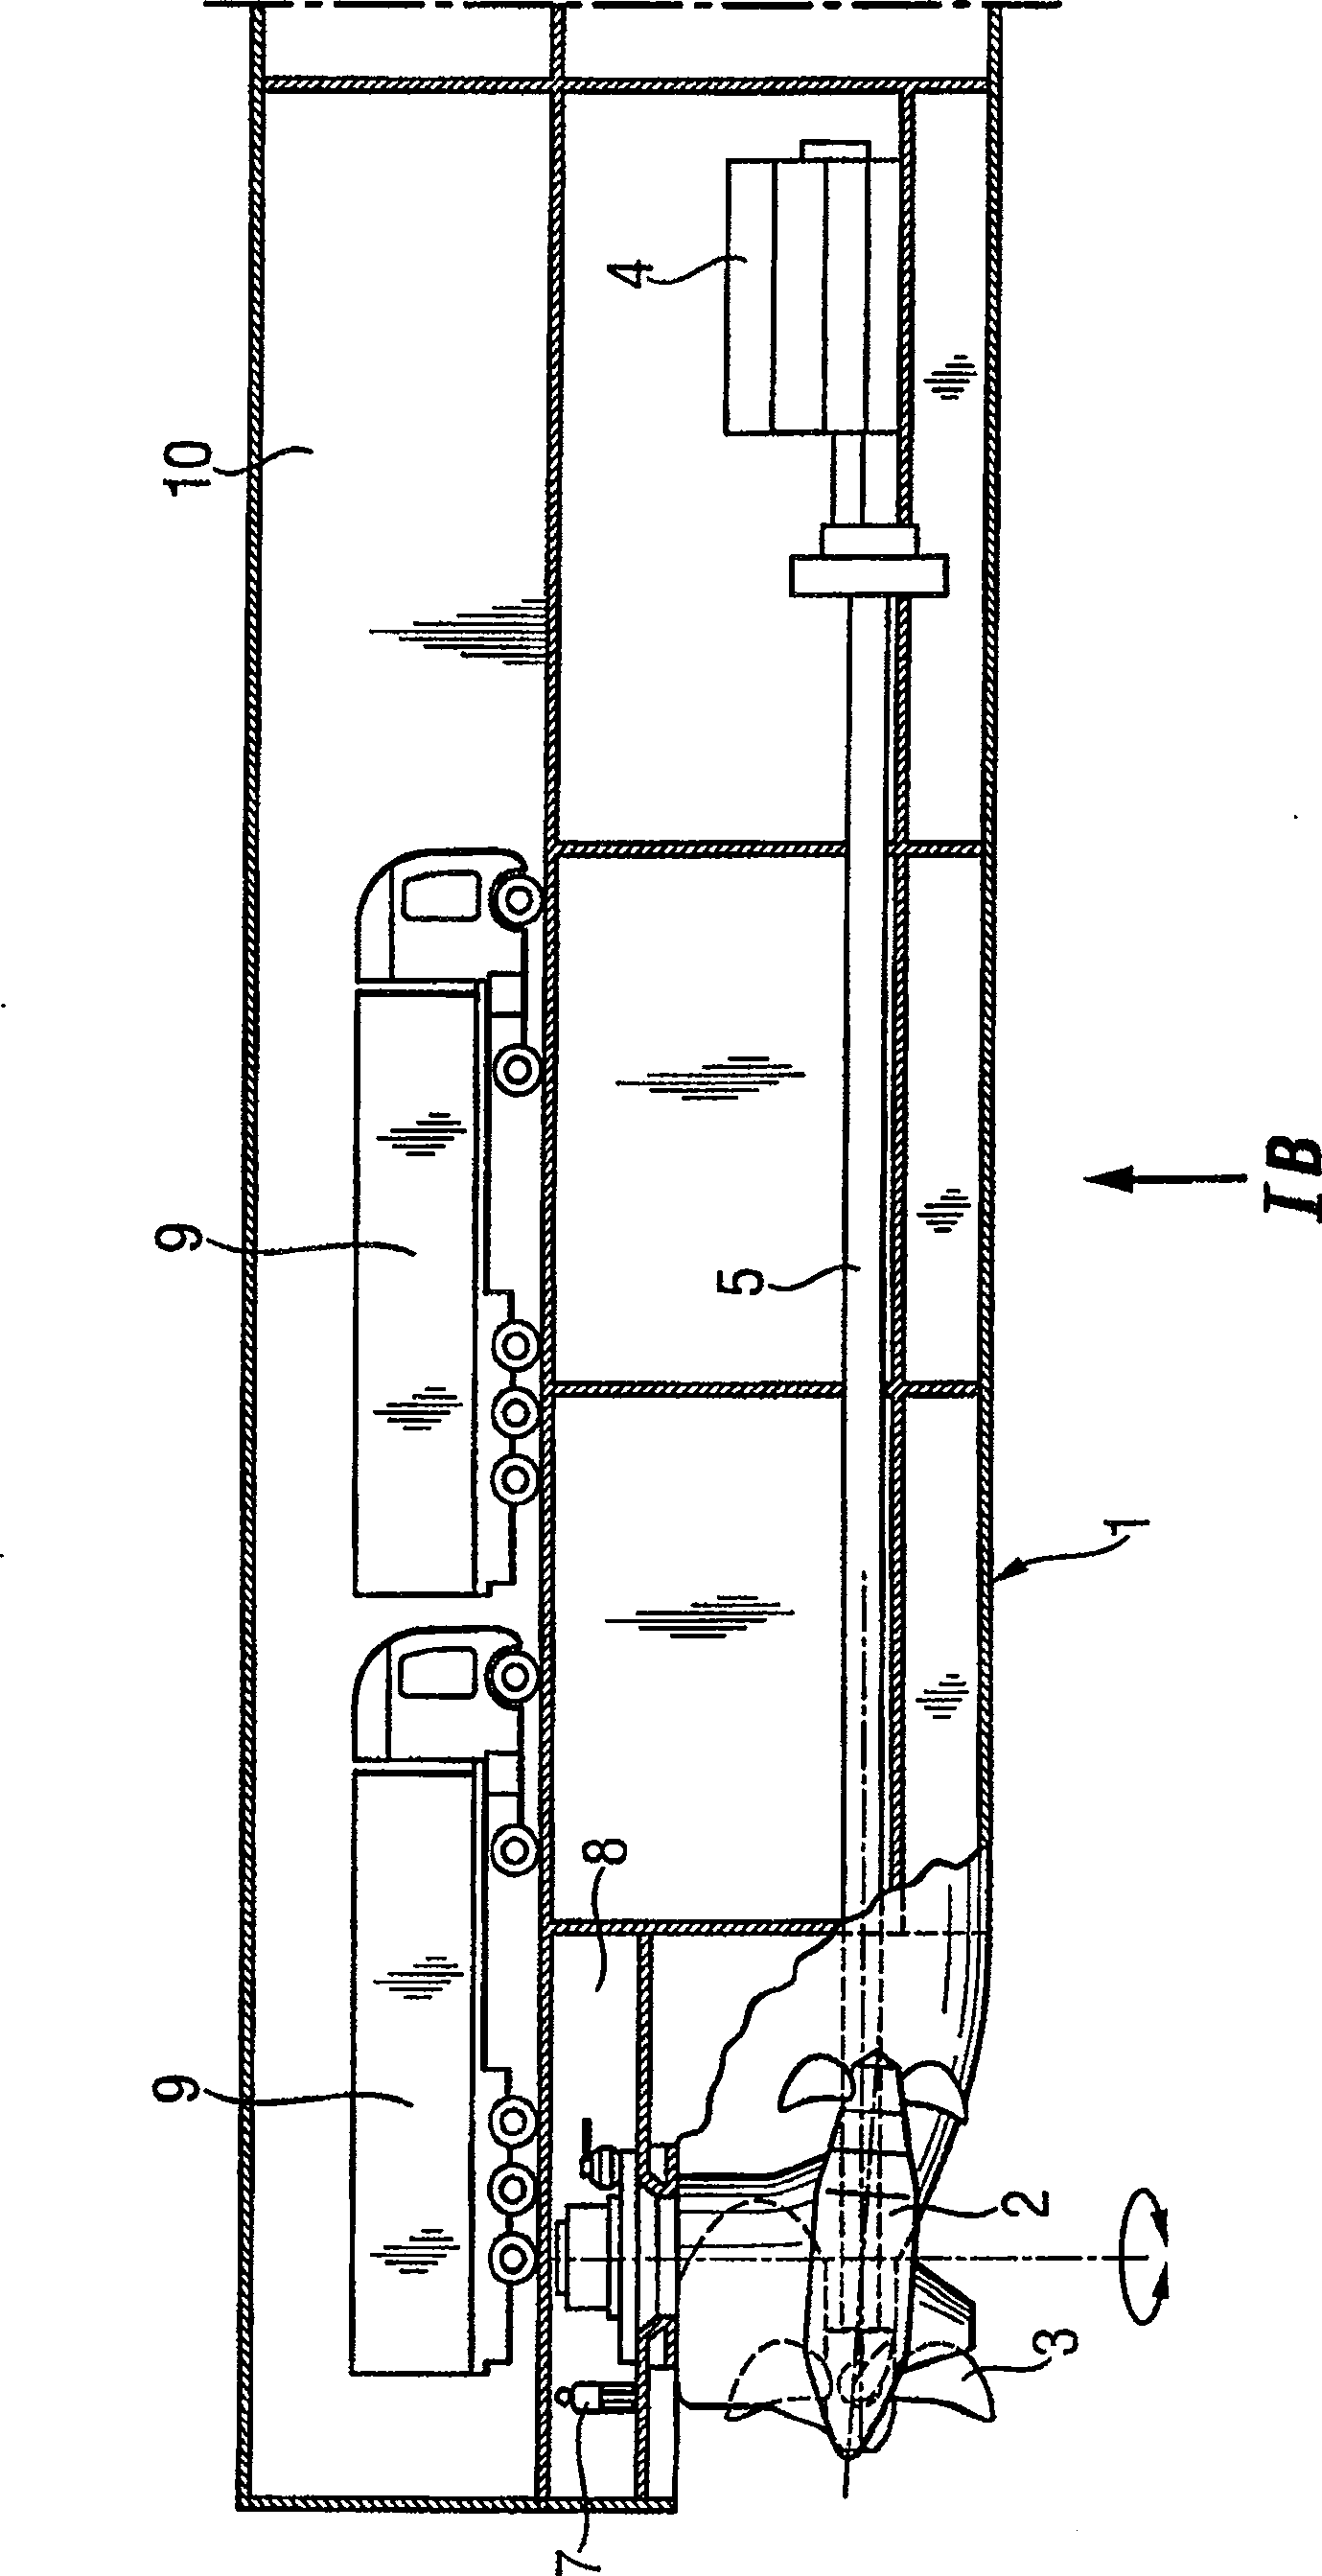 Structure for steering a water-craft